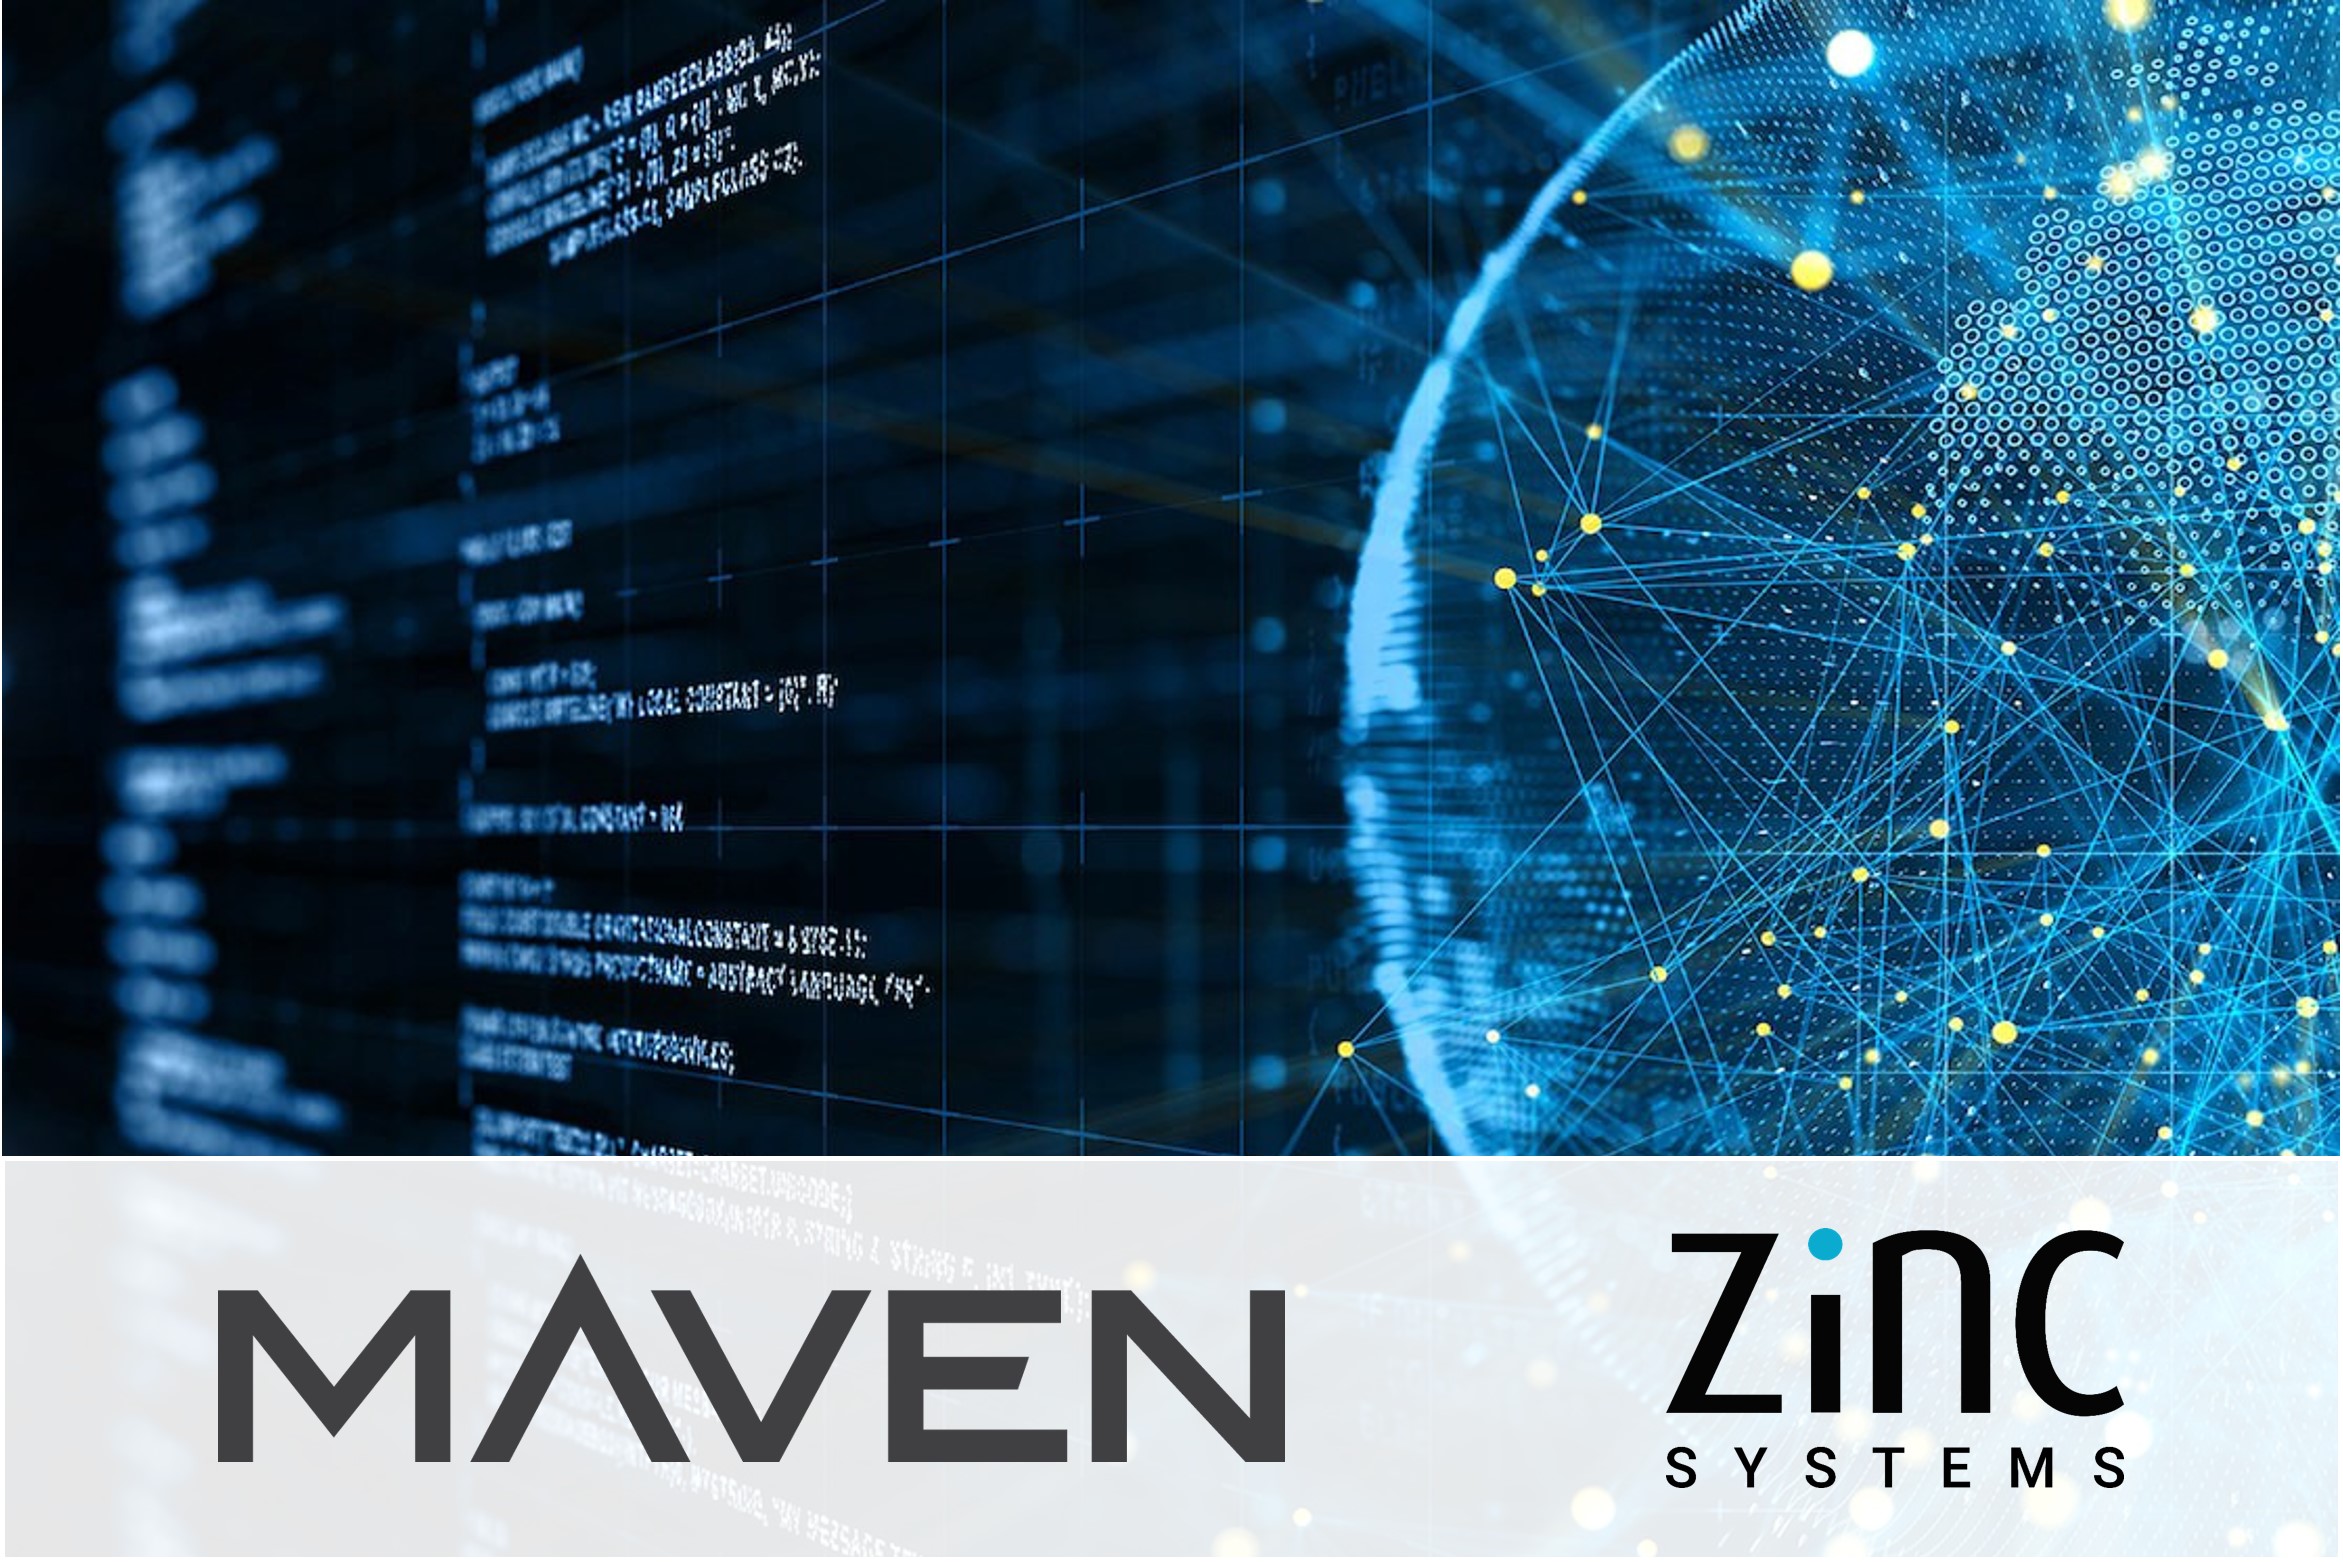 Luminii provides CDD support to Maven on their investment in Zinc Systems